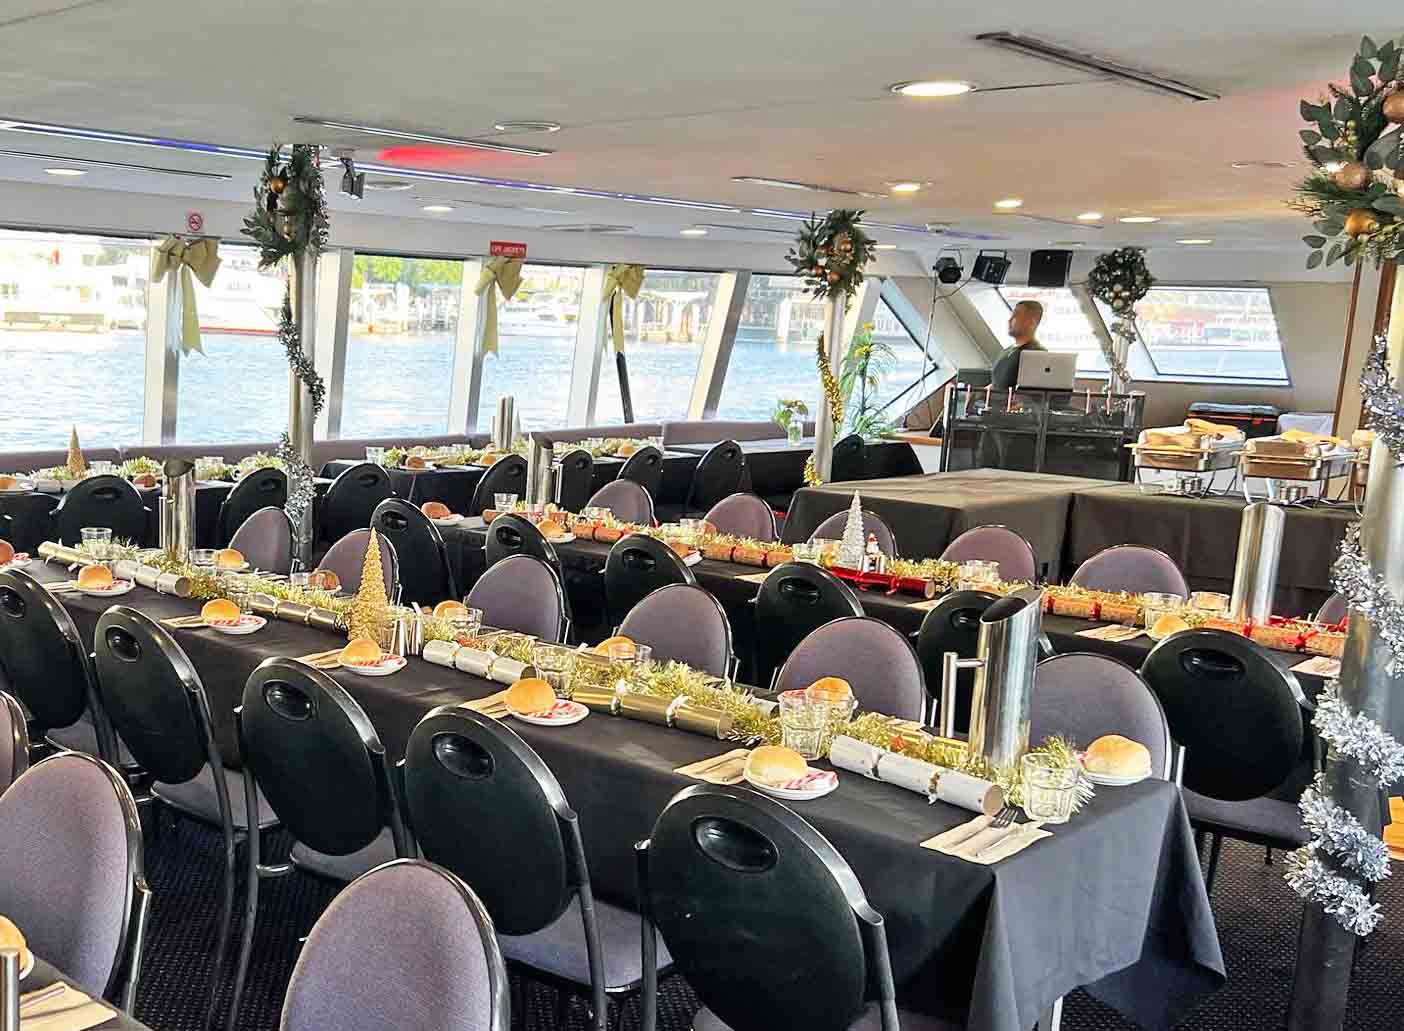 Vagabond <br/> Harbour Cruise Functions